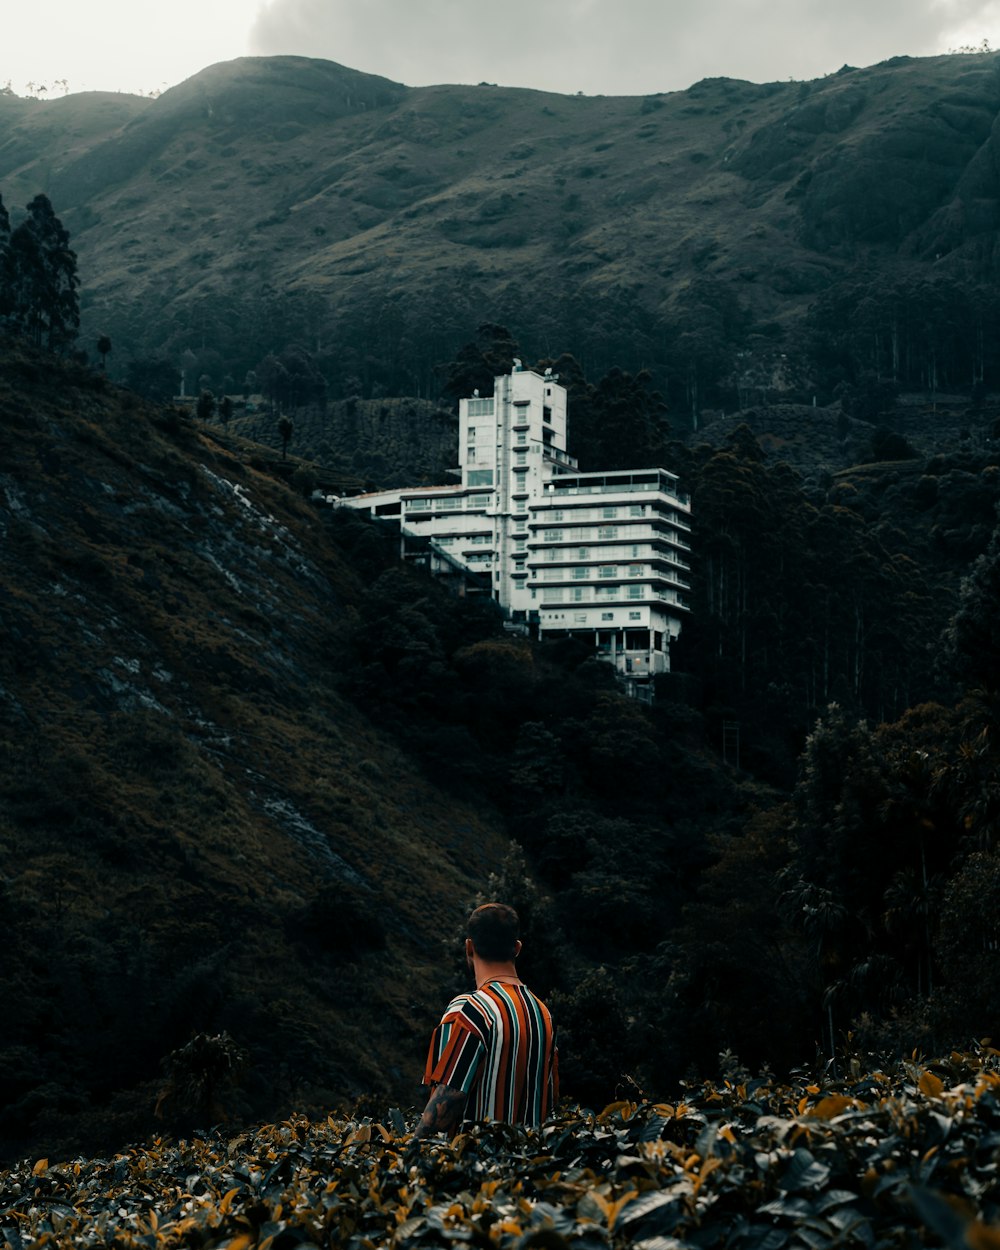 a person standing on a rocky hillside looking at a large white building